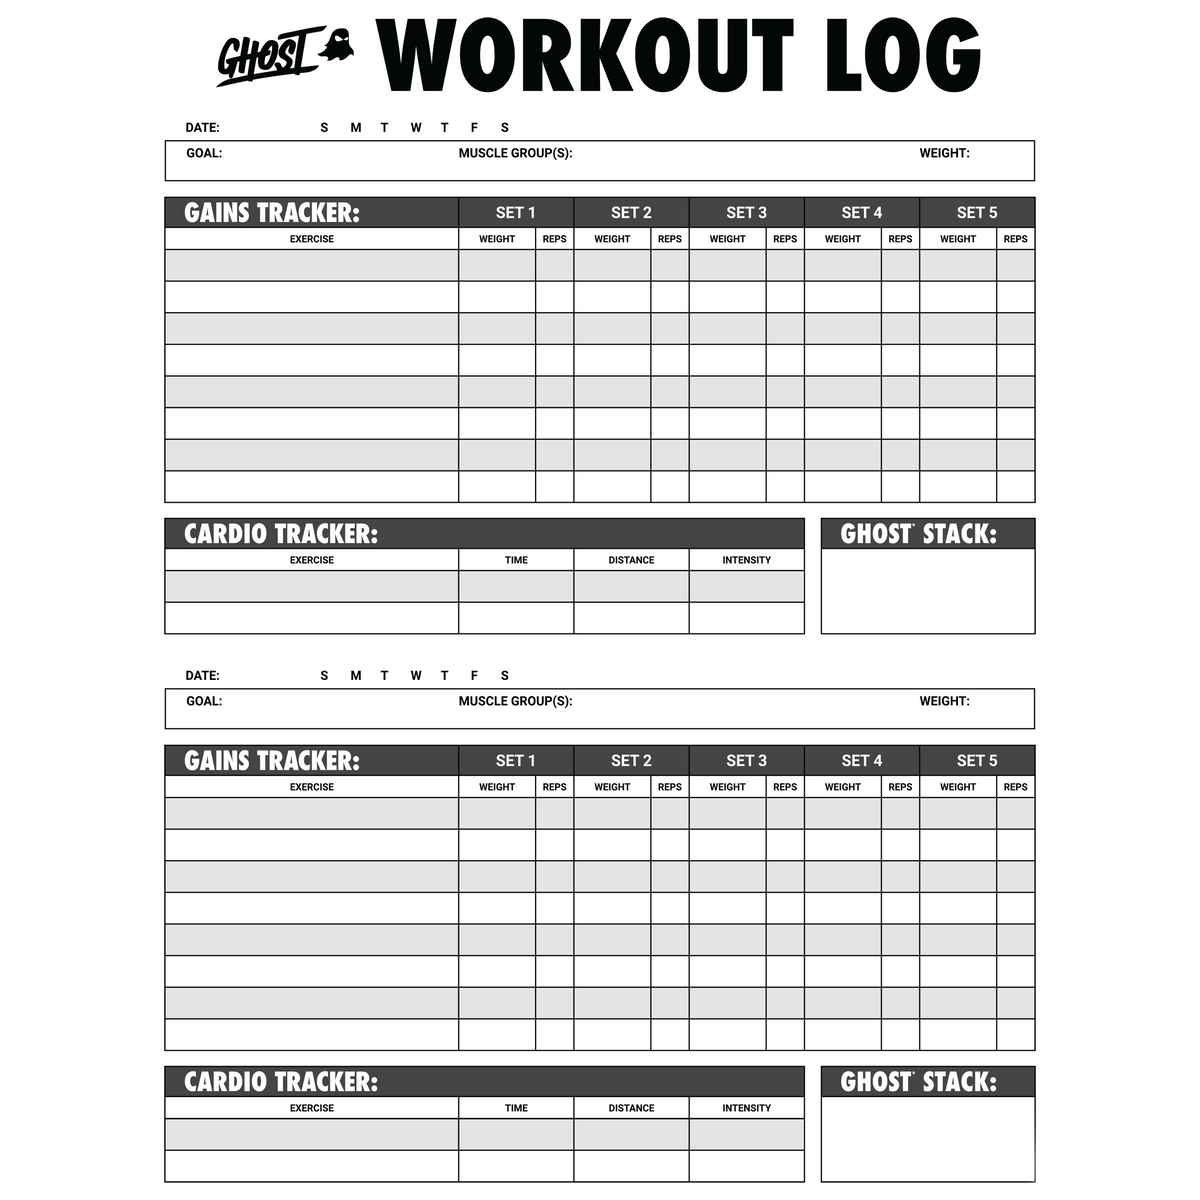 GHOST® WORKOUT LOG